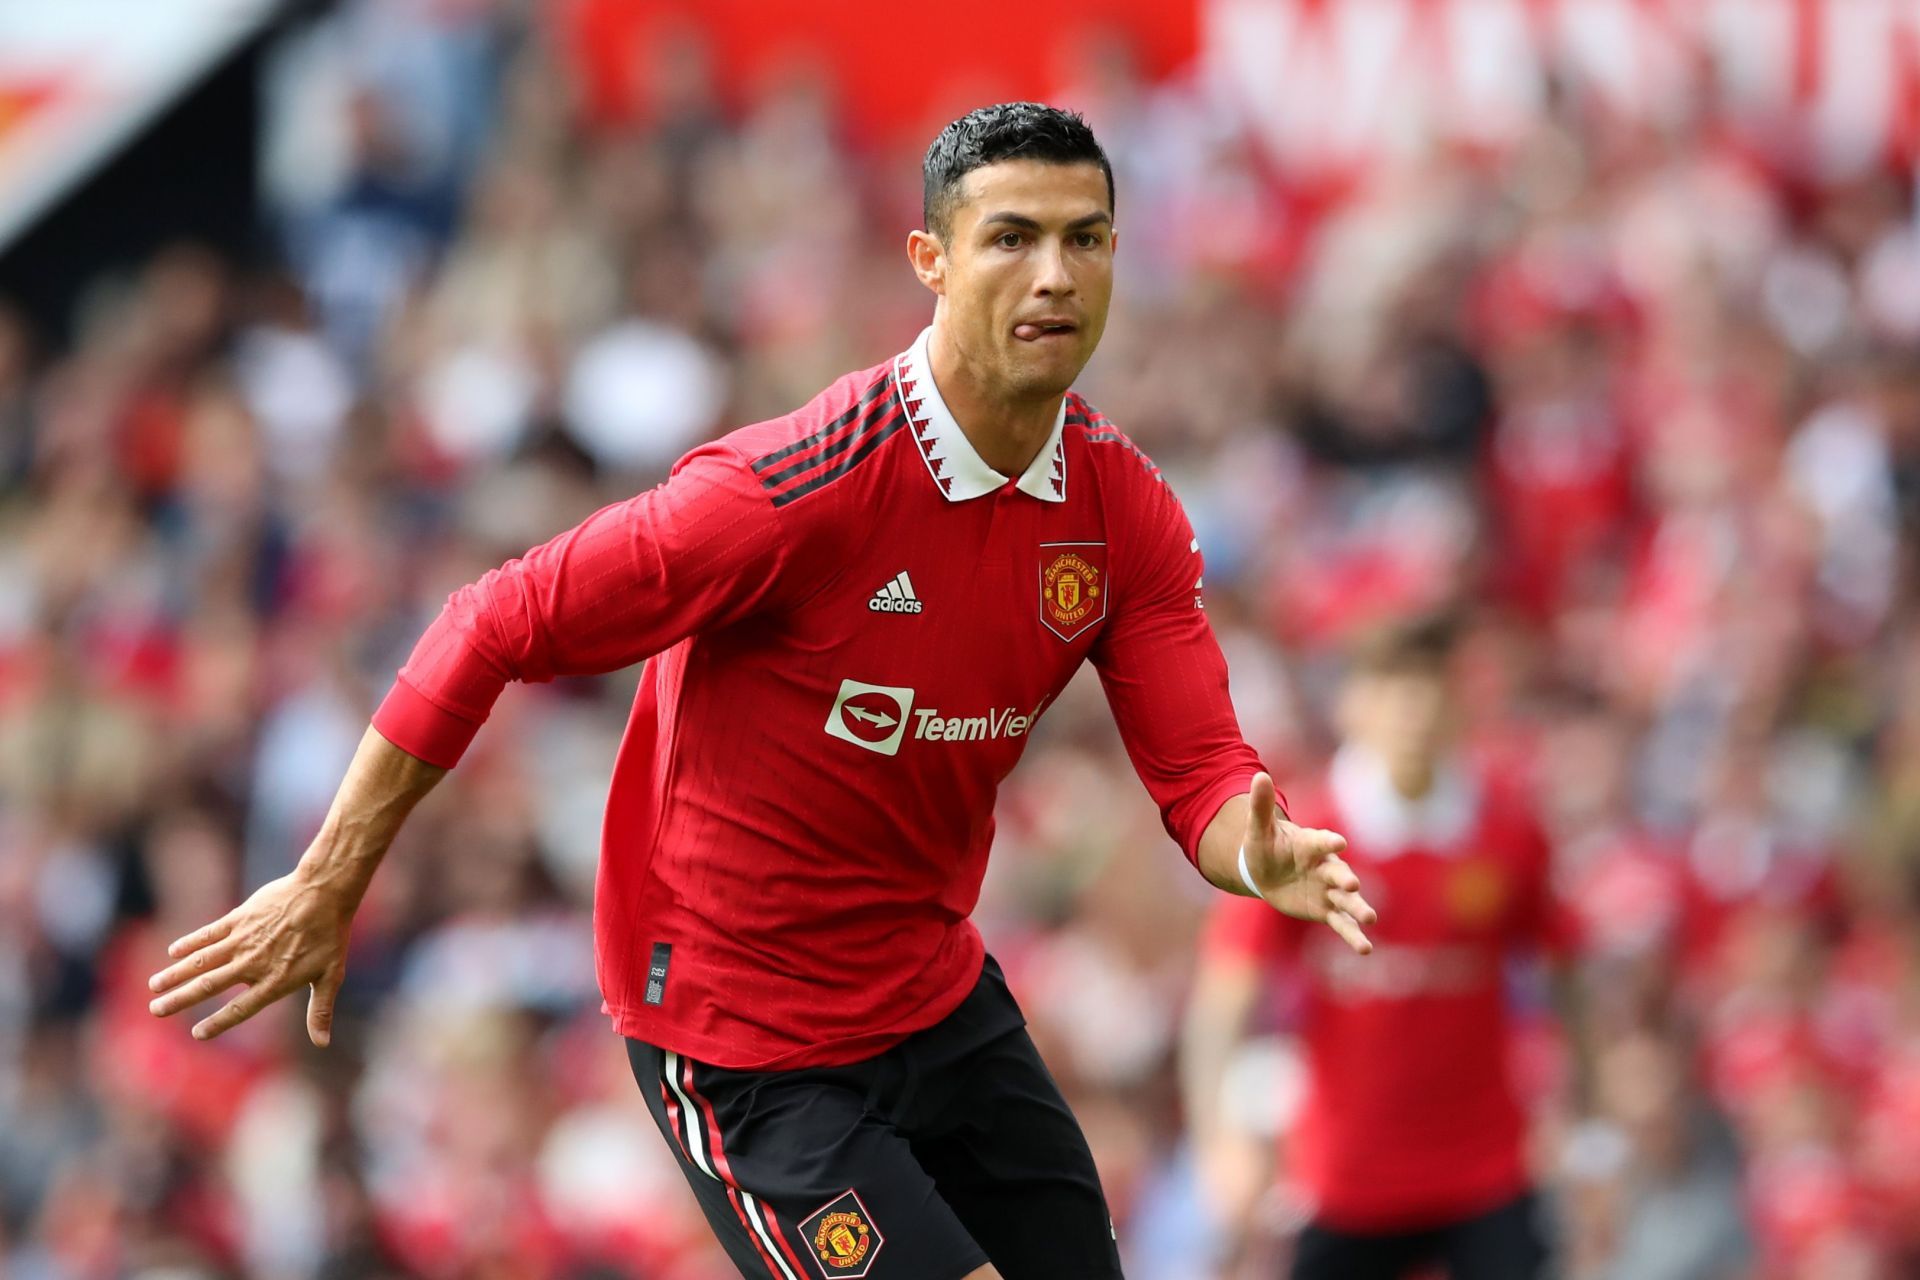 Ronaldo could return for United. (Photo by Jan Kruger/Getty Images)